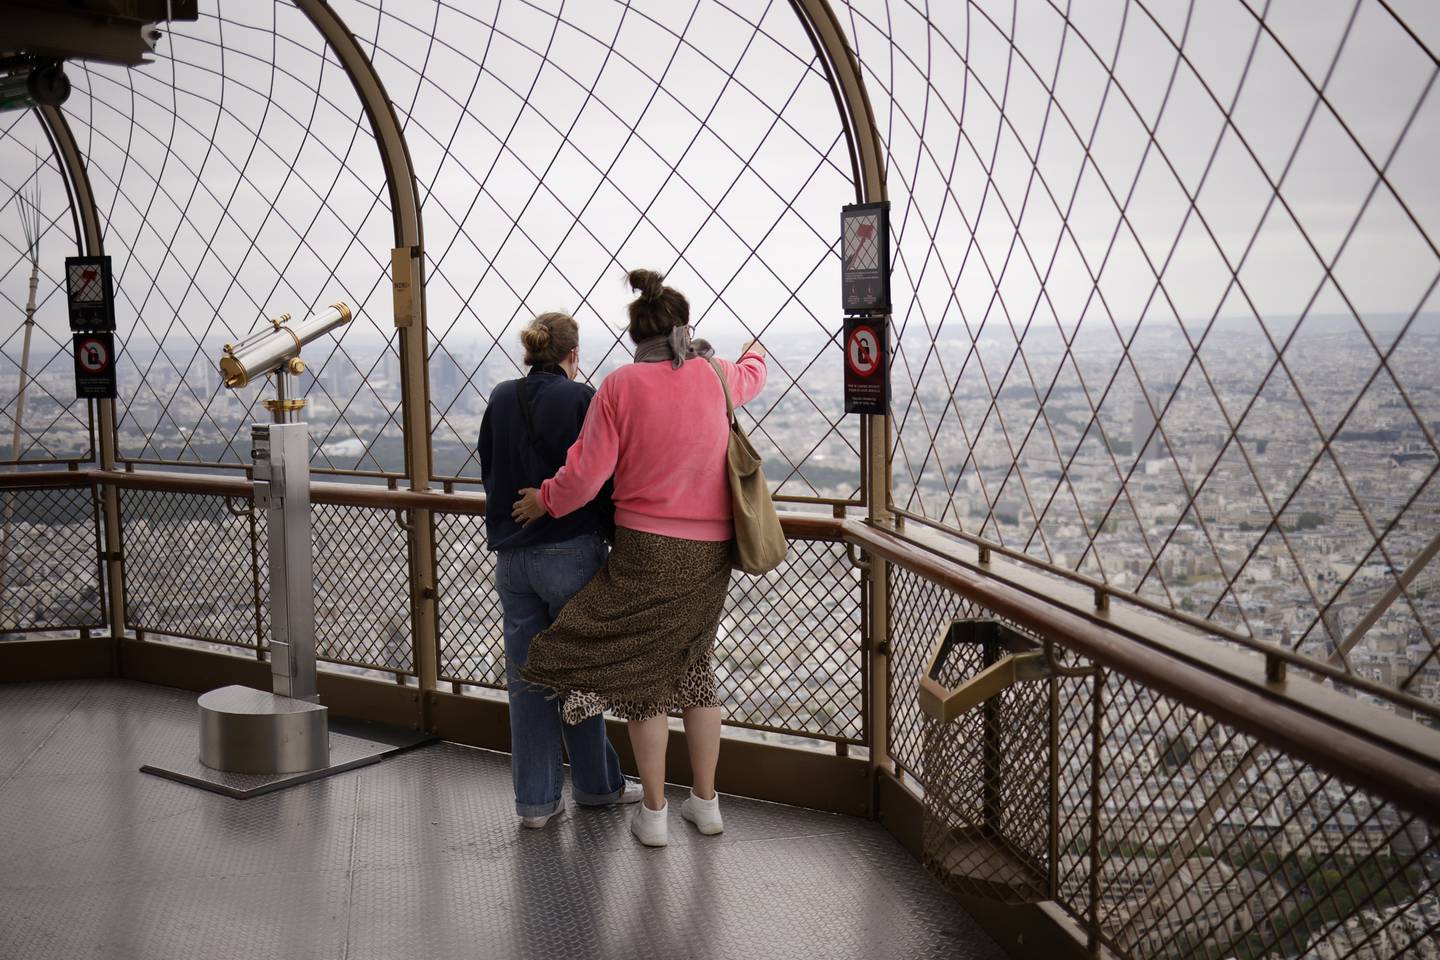 Visitors enjoy the view on the reopening day of the Eiffel Tower in Paris. EPA